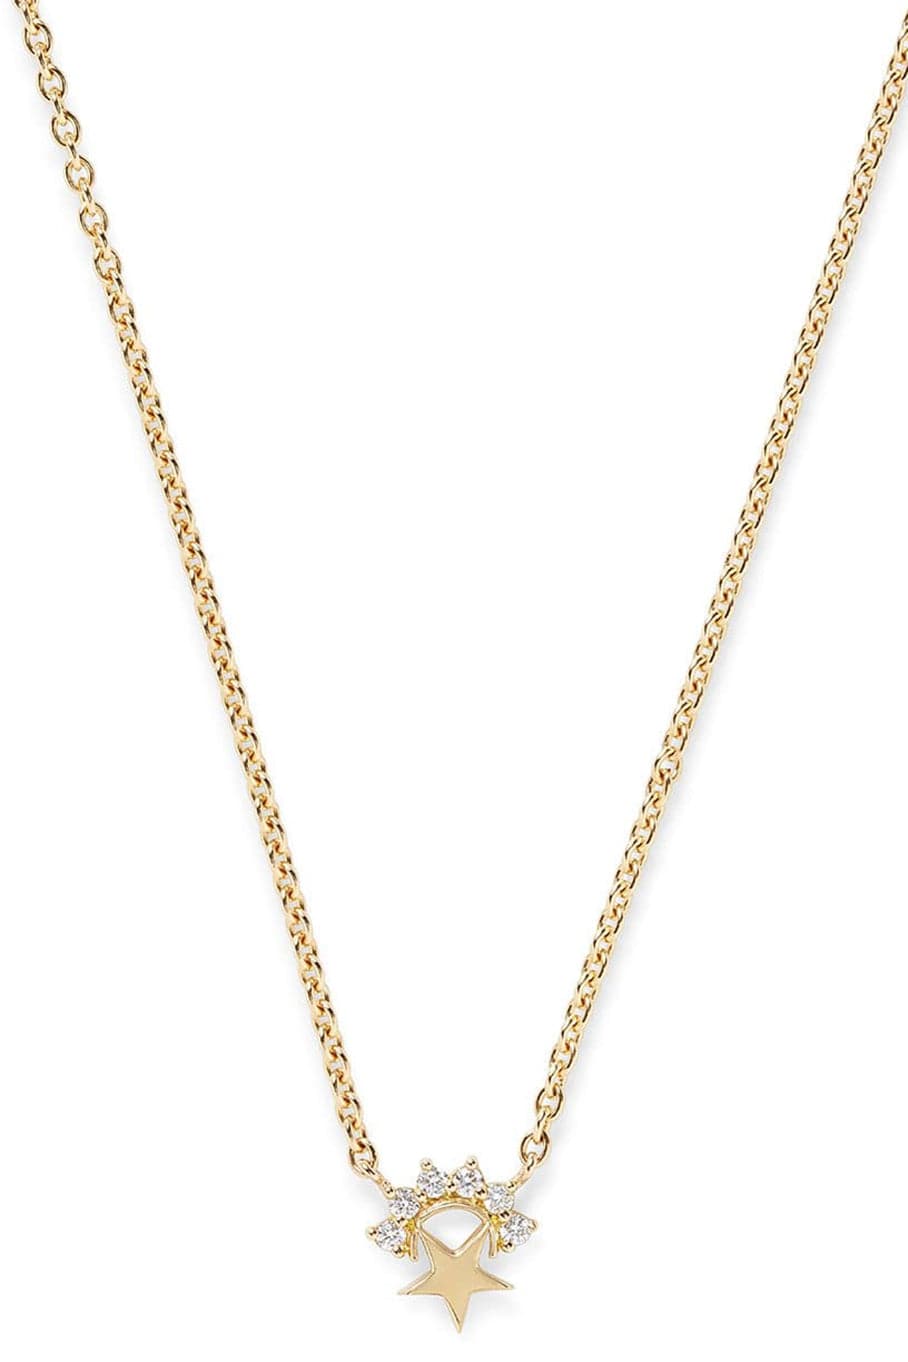 NOUVEL HERITAGE-Small Mystic Diamond Star Necklace-YELLOW GOLD